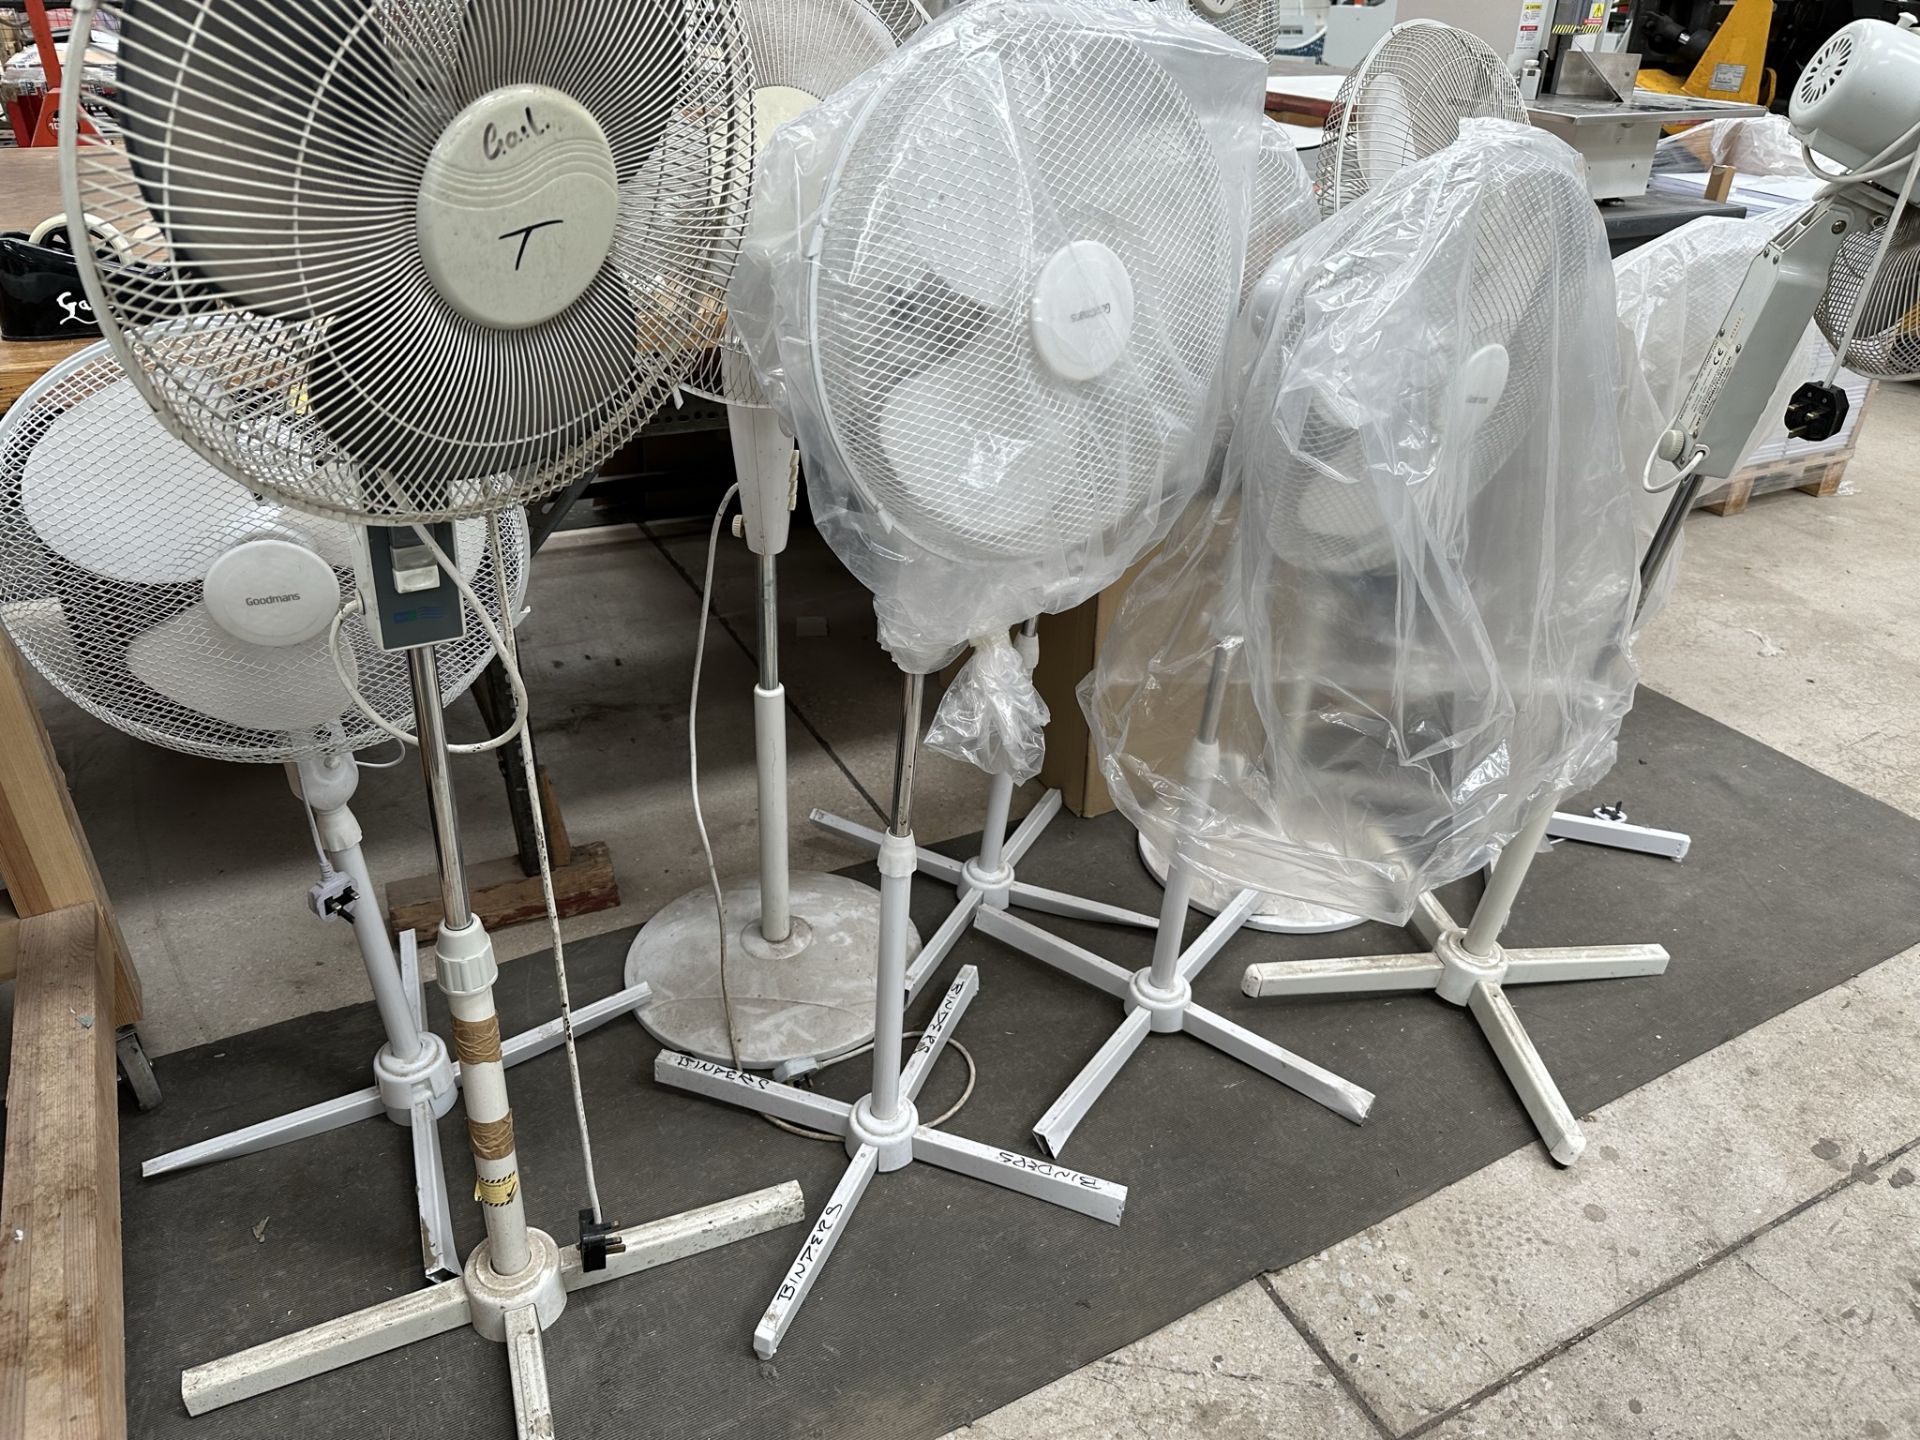 12 x Various Desk & Floor Fans - As Pictured - Image 2 of 3